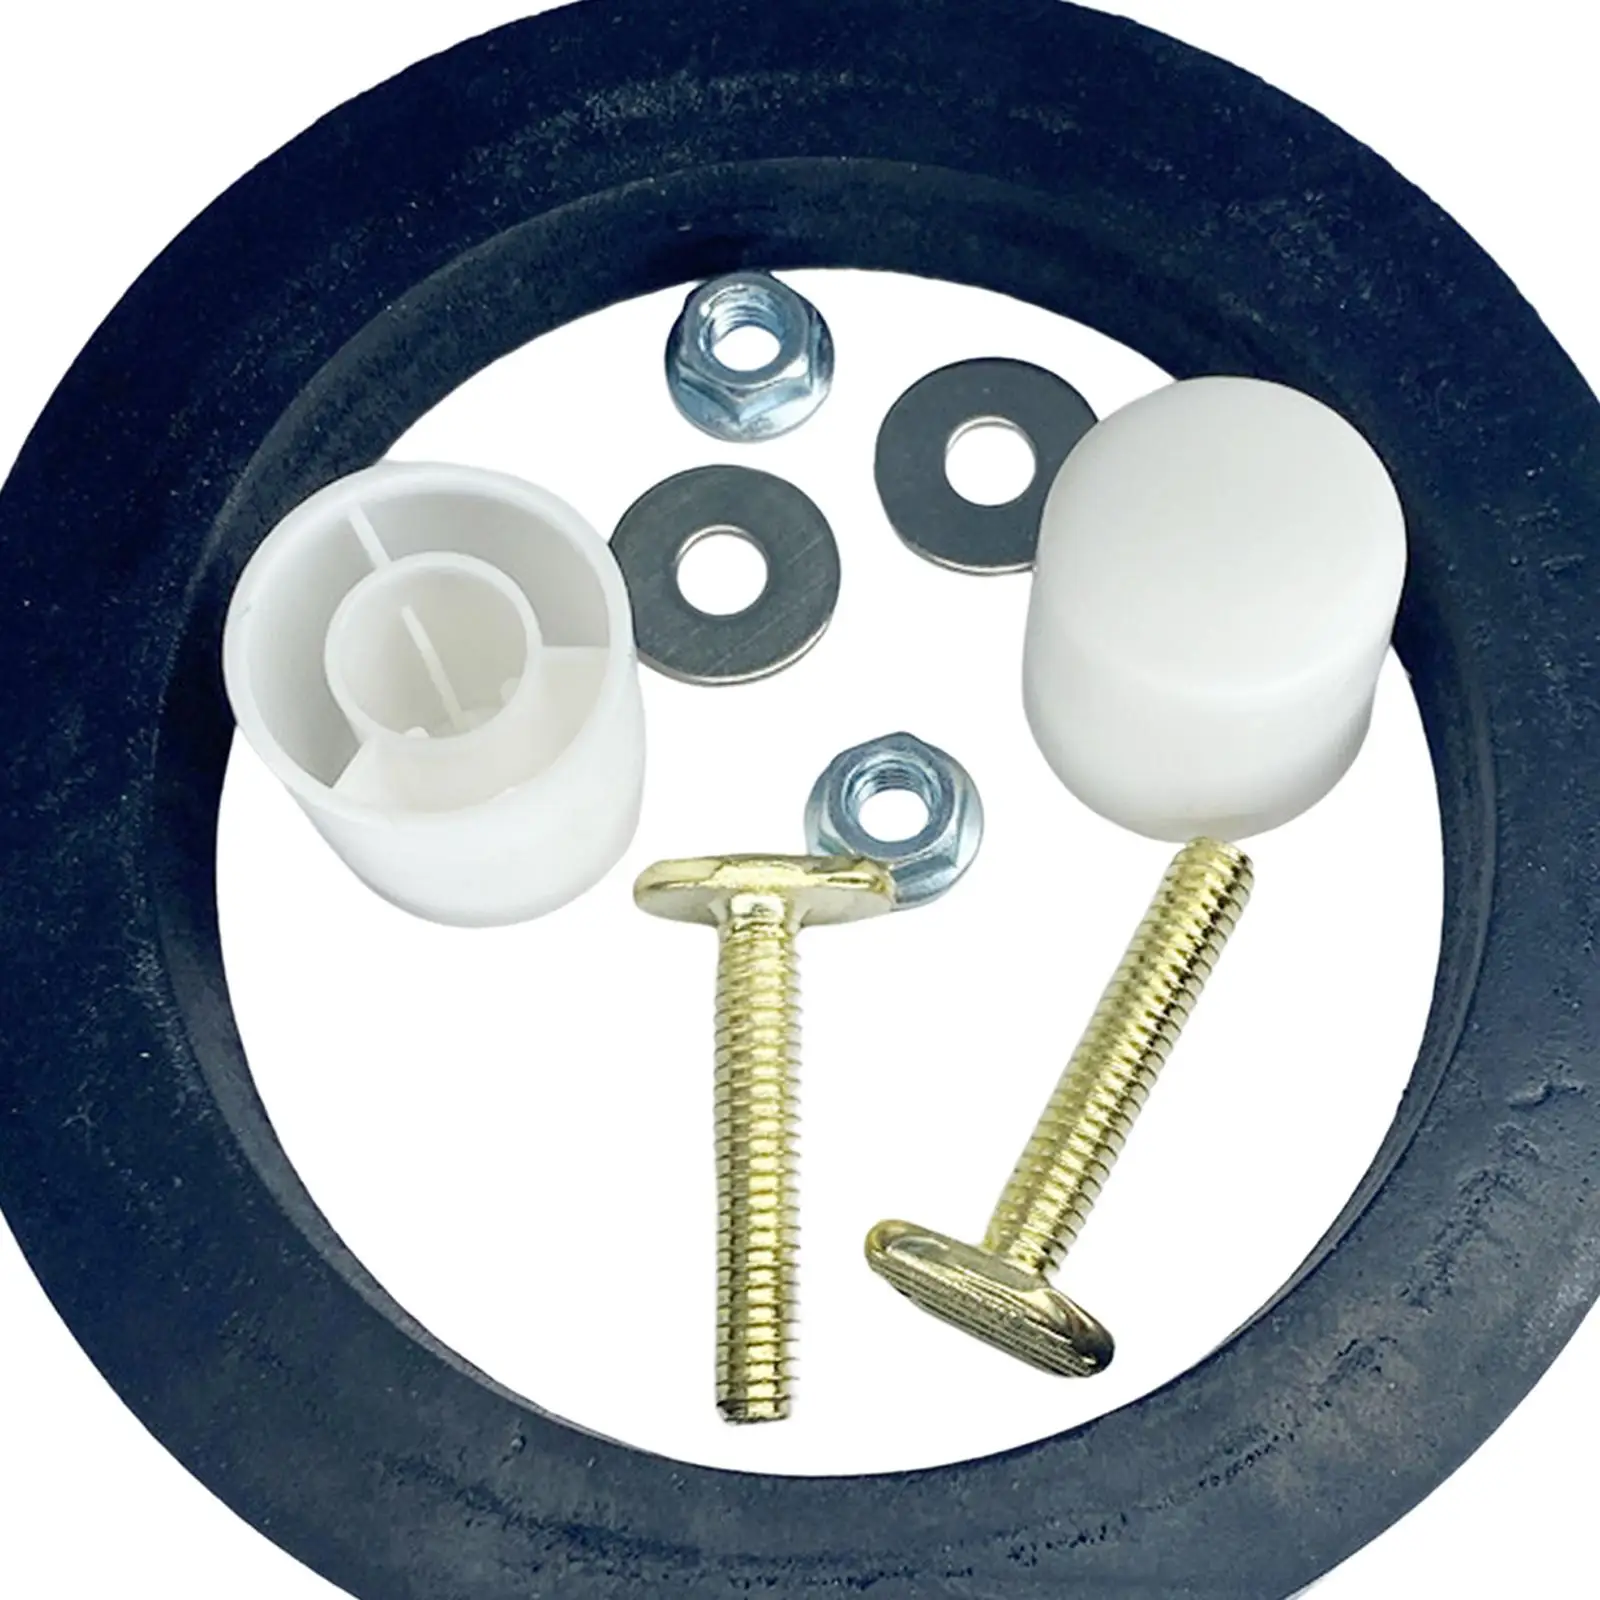 RV Toilet Parts Seal Kit for 300, 310, 320 Series Easy to Install Practical